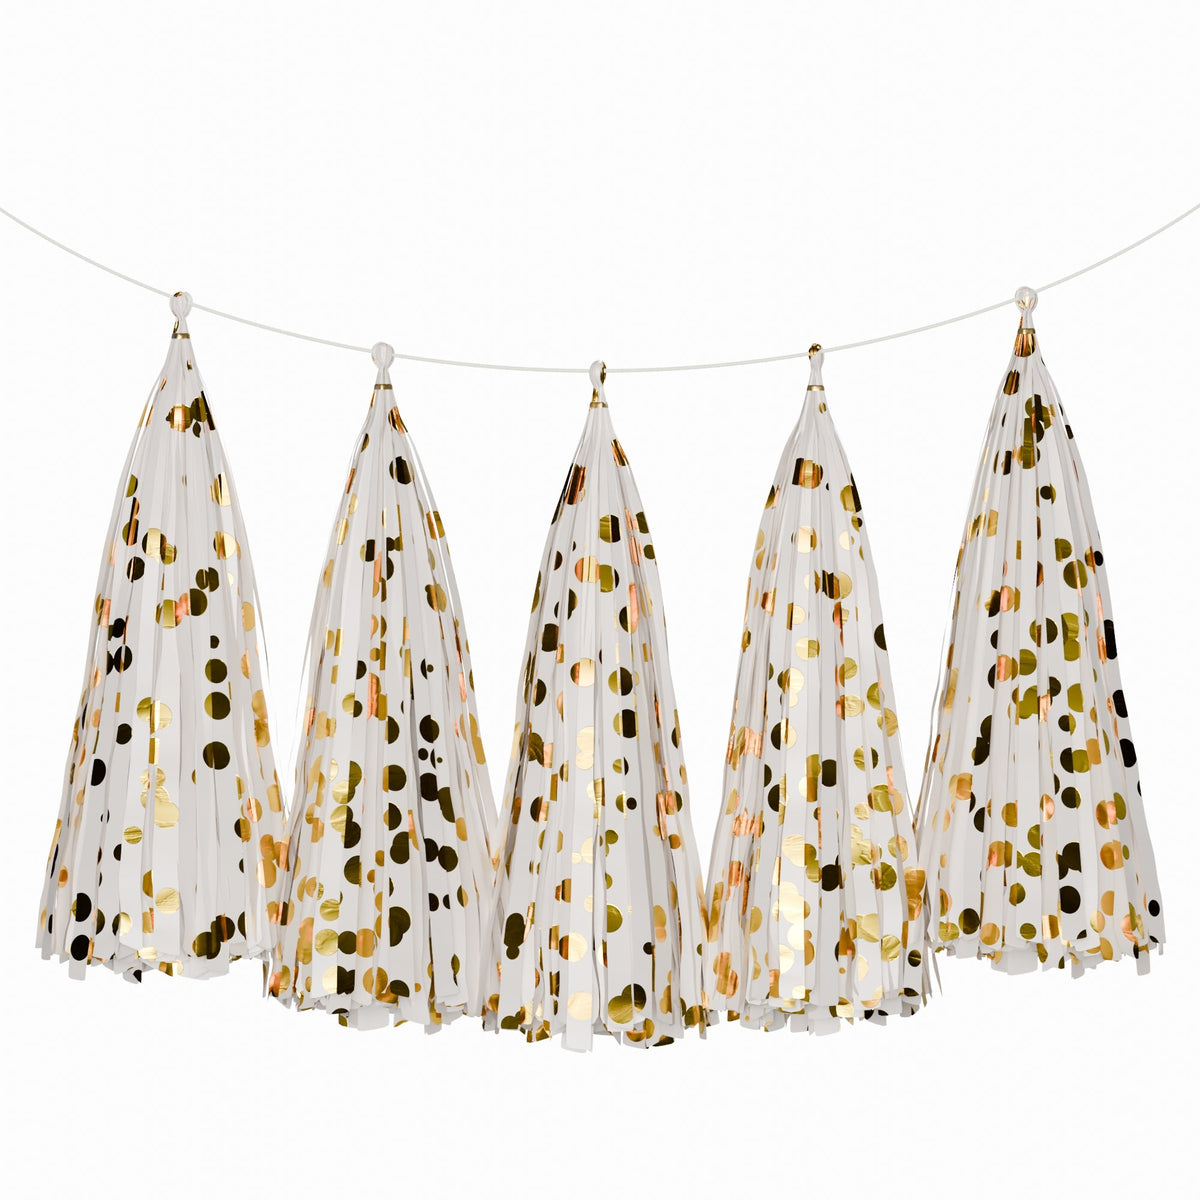 Weifang Mayshine Imp&exp co Decorations White & Gold Dots Tassel Garland, 5 Count 810064197291